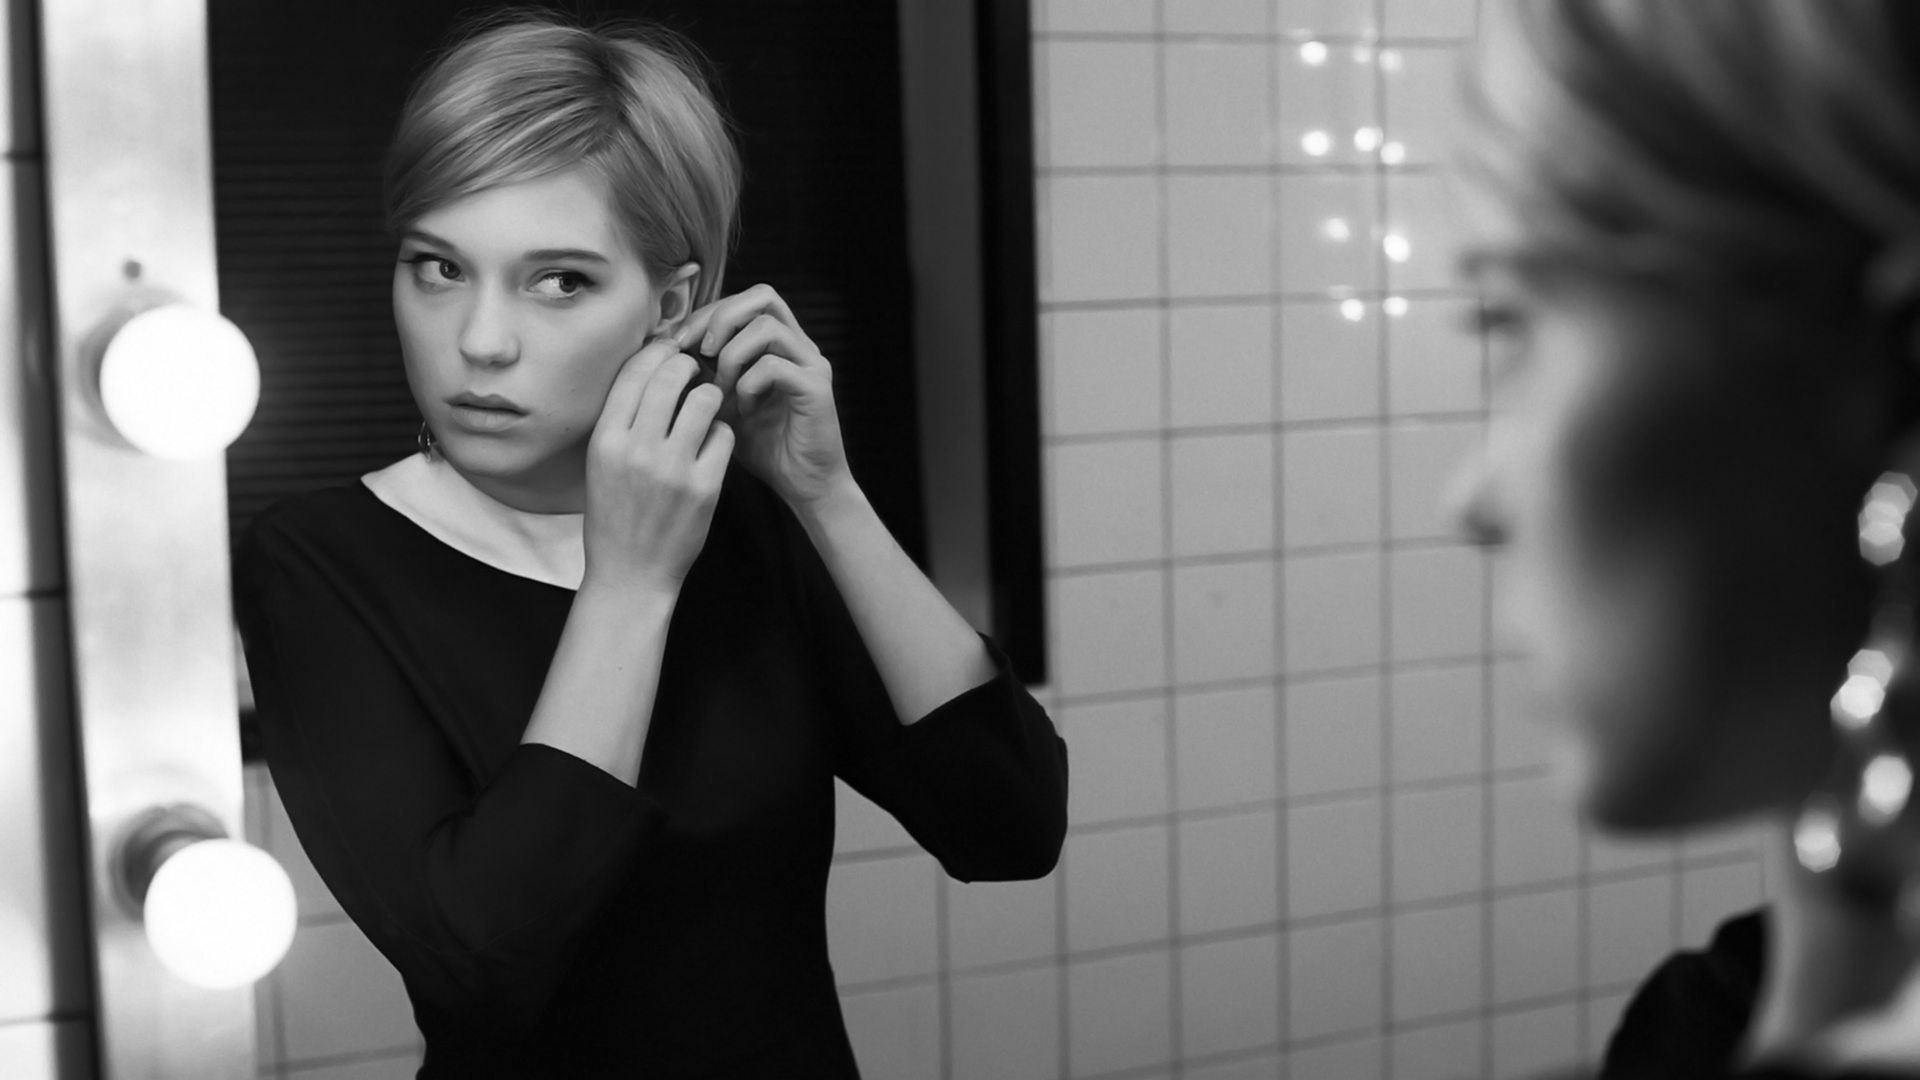 People 1920x1080 actress French actress Léa Seydoux monochrome women French women model mirror reflection women indoors indoors